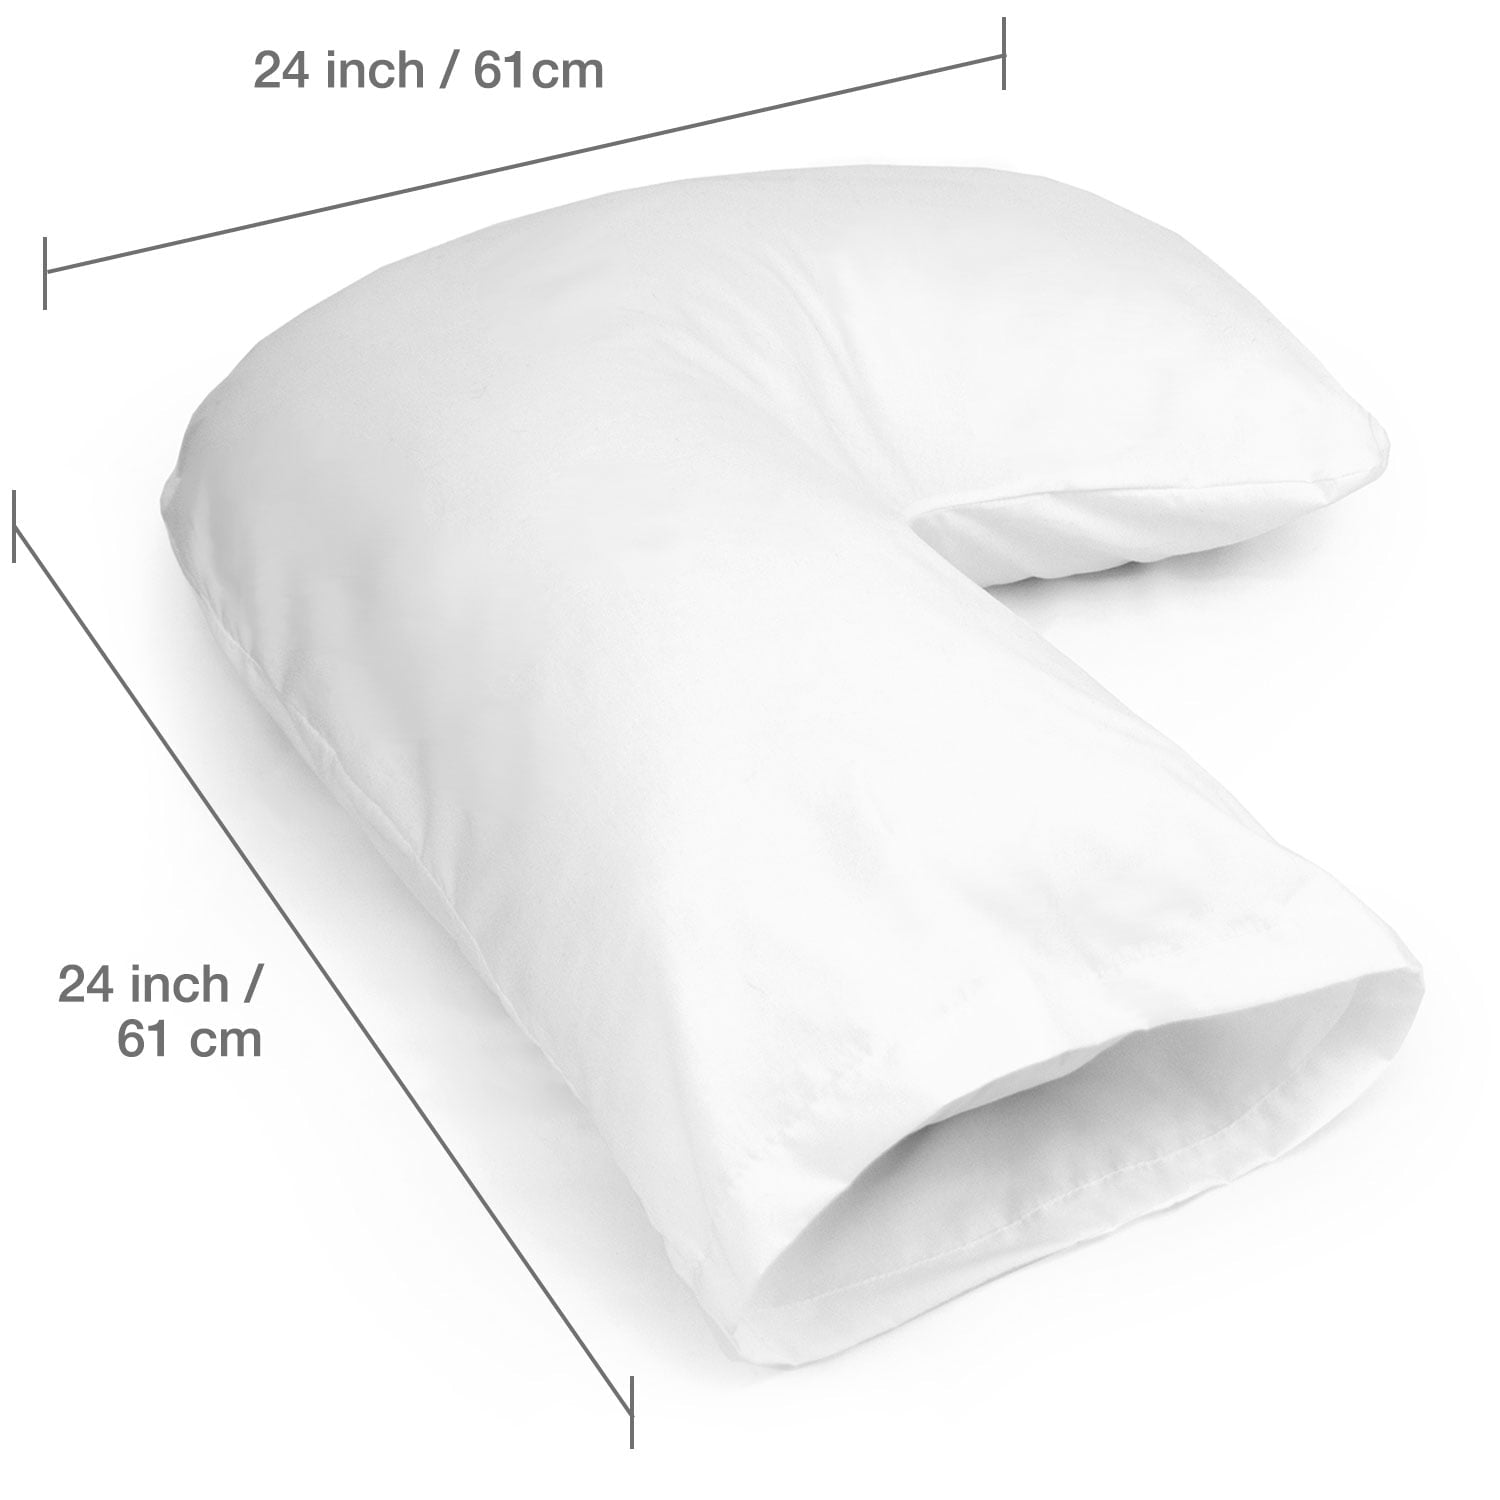 DMI U Shaped Polyester Contour Body Pillow Great for Side Sleeping, Neck Pain, Cervical Support & Pregnancy, Hypoallergenic With Machine Washable Cover